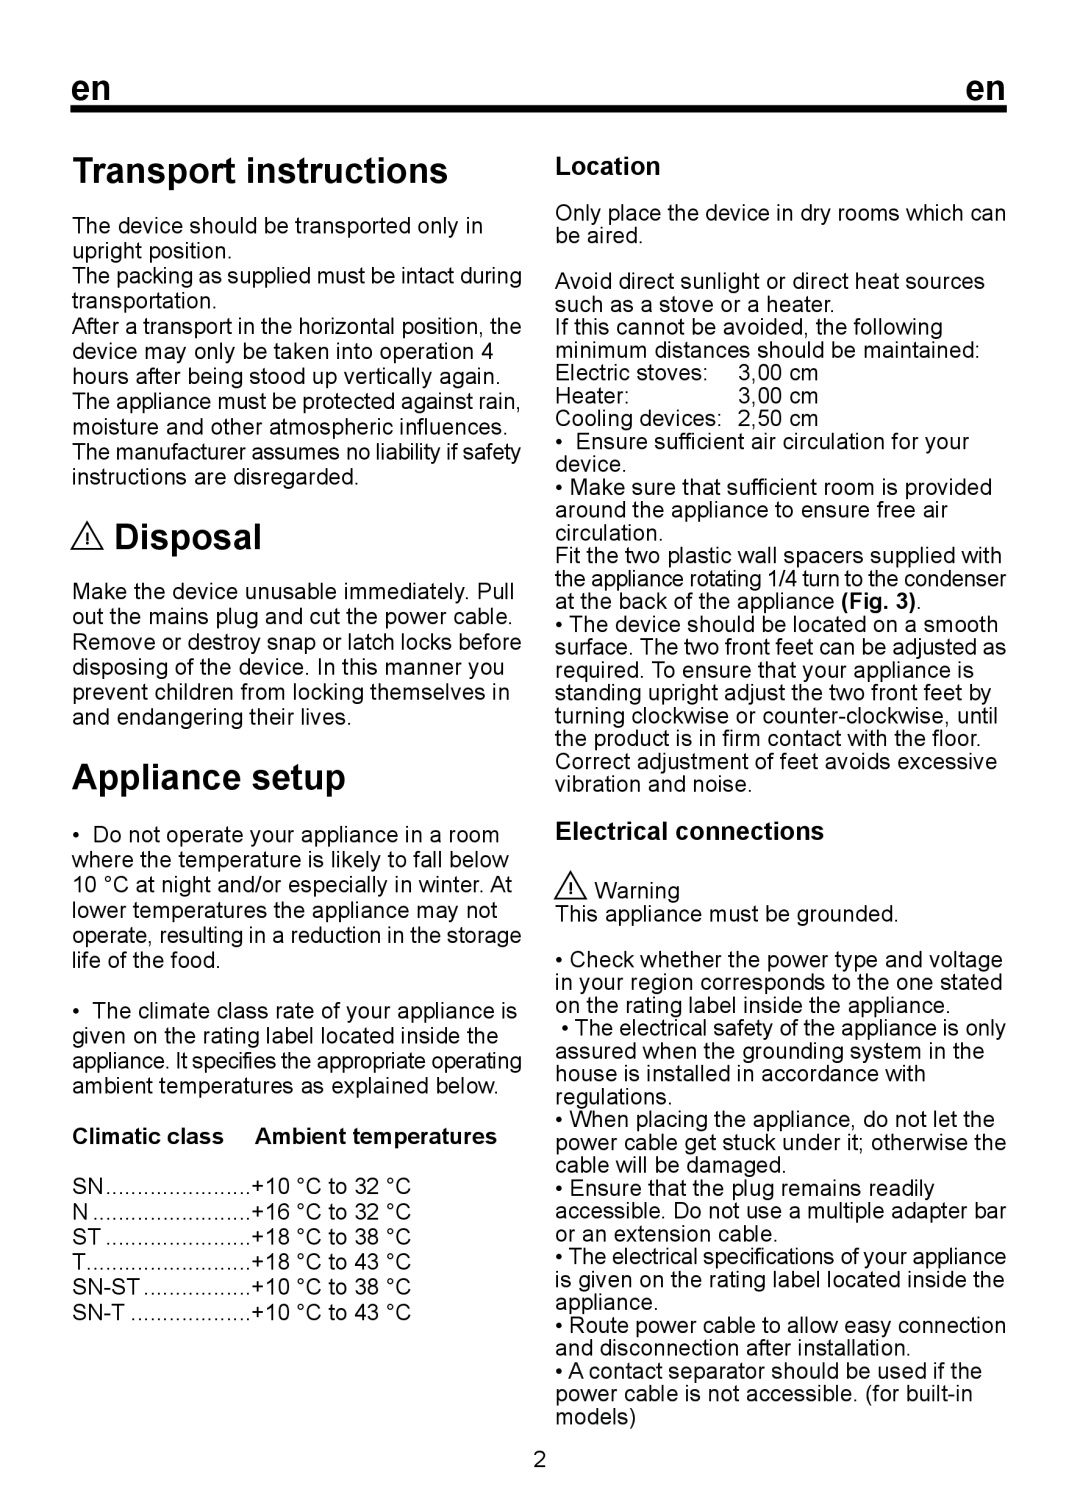 Smeg FD250A Transport instructions, Disposal, Appliance setup, Location, Electrical connections, Climatic class 